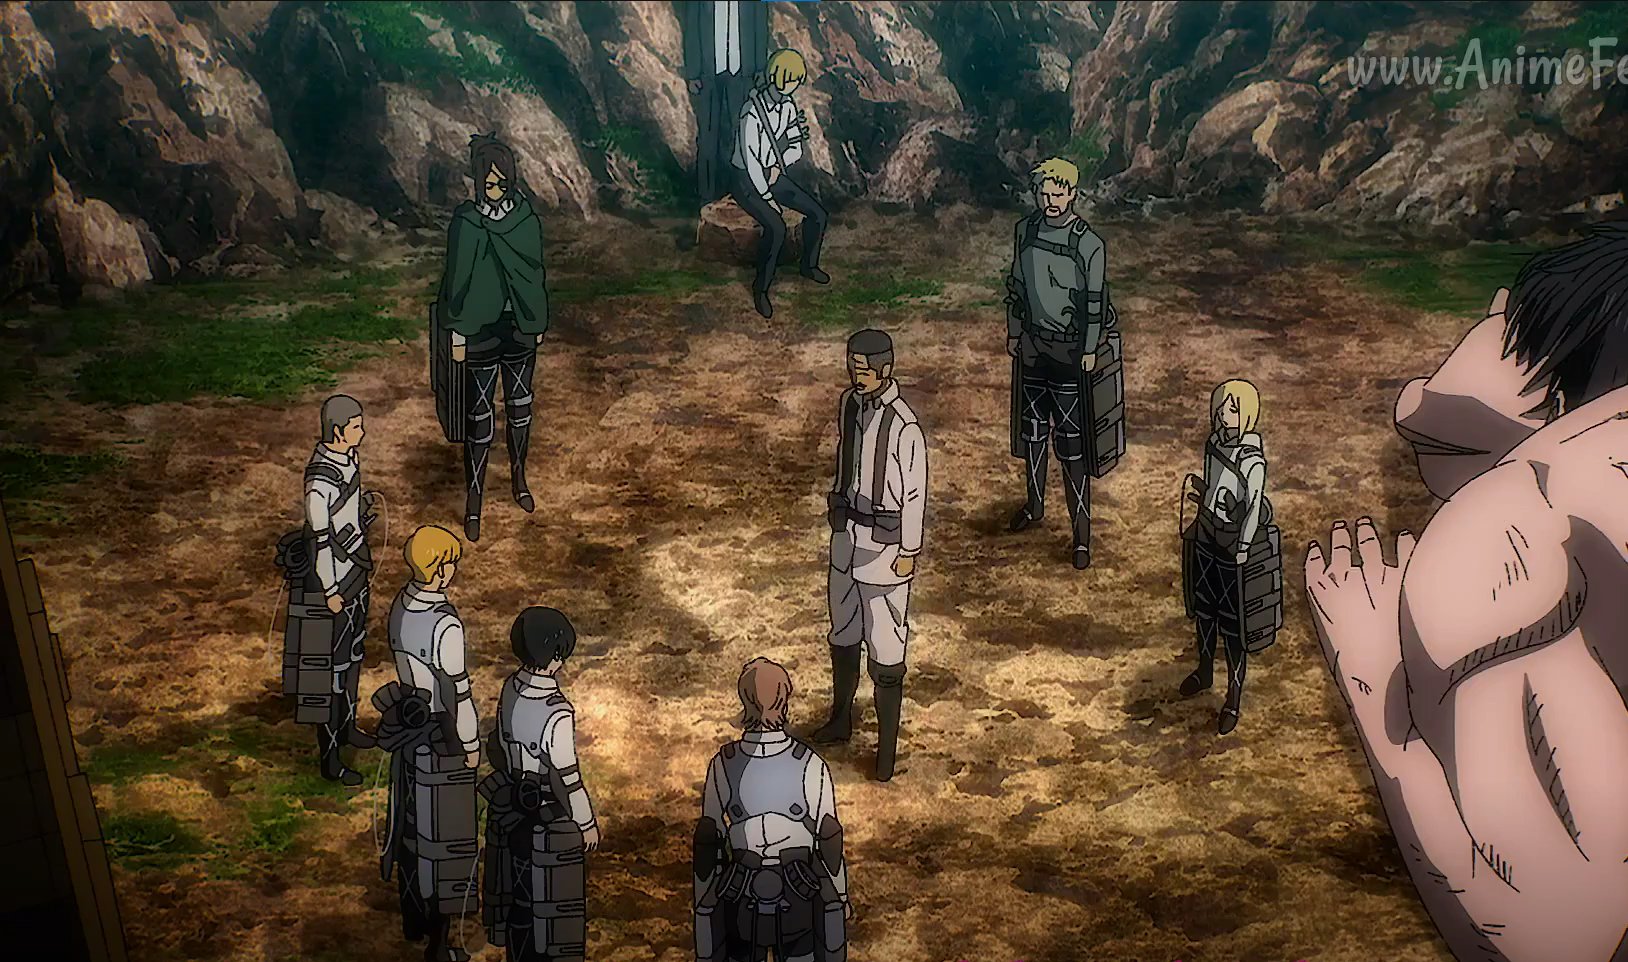 Attack On Titan Episode 77 Release Date And Where To Watch It Officially?